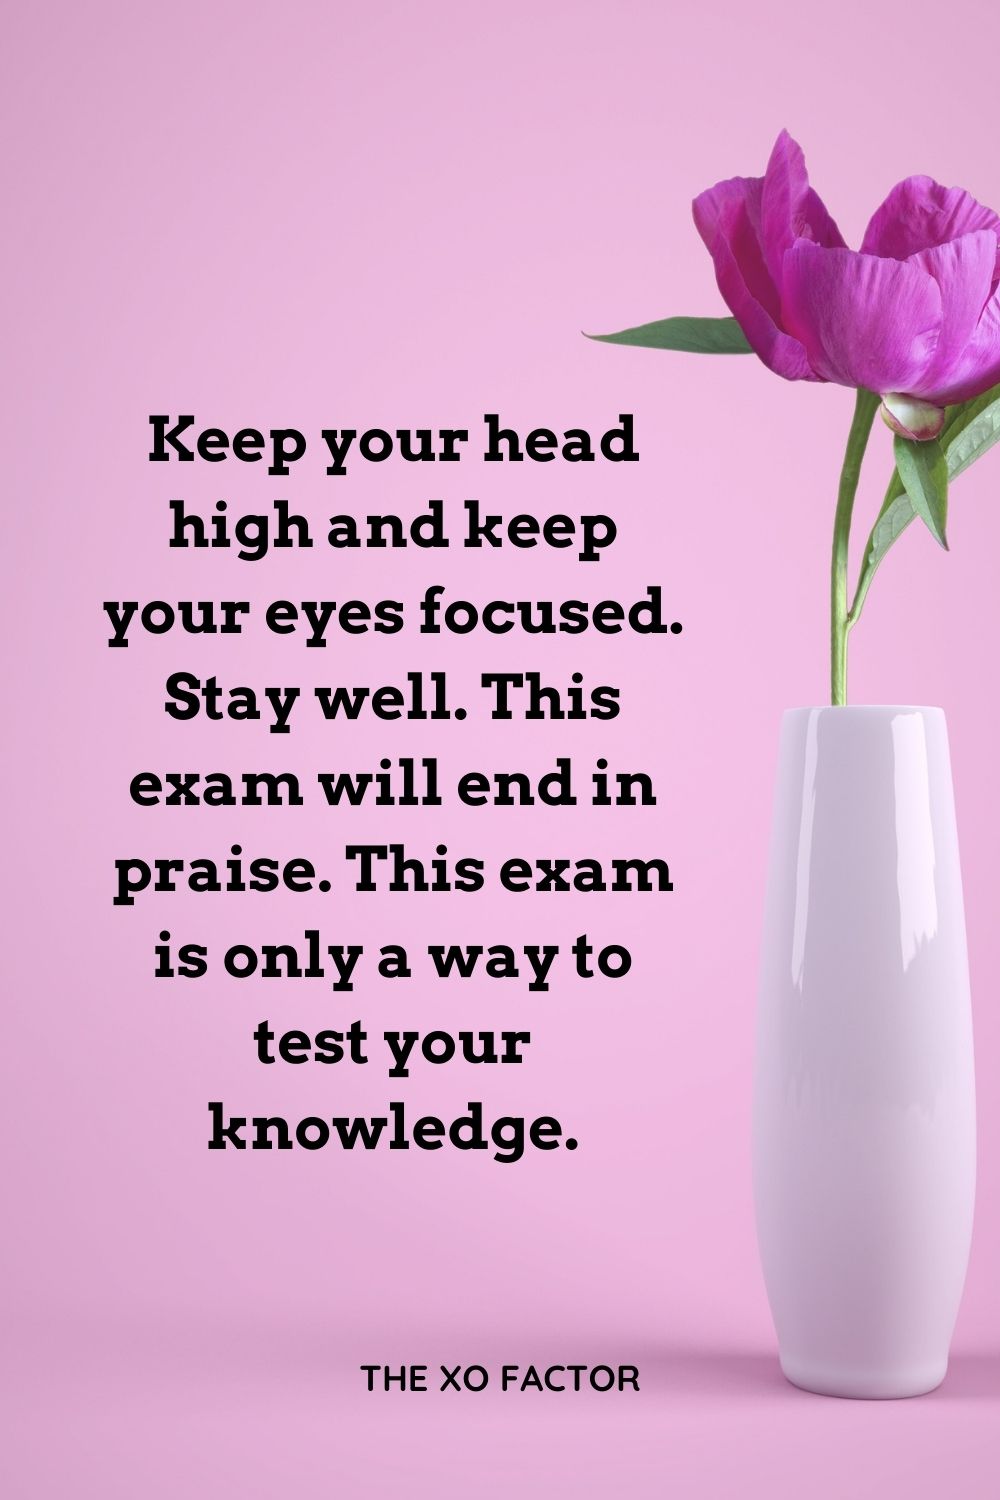 Keep your head high and keep your eyes focused. Stay well. This exam will end in praise. This exam is only a way to test your knowledge.